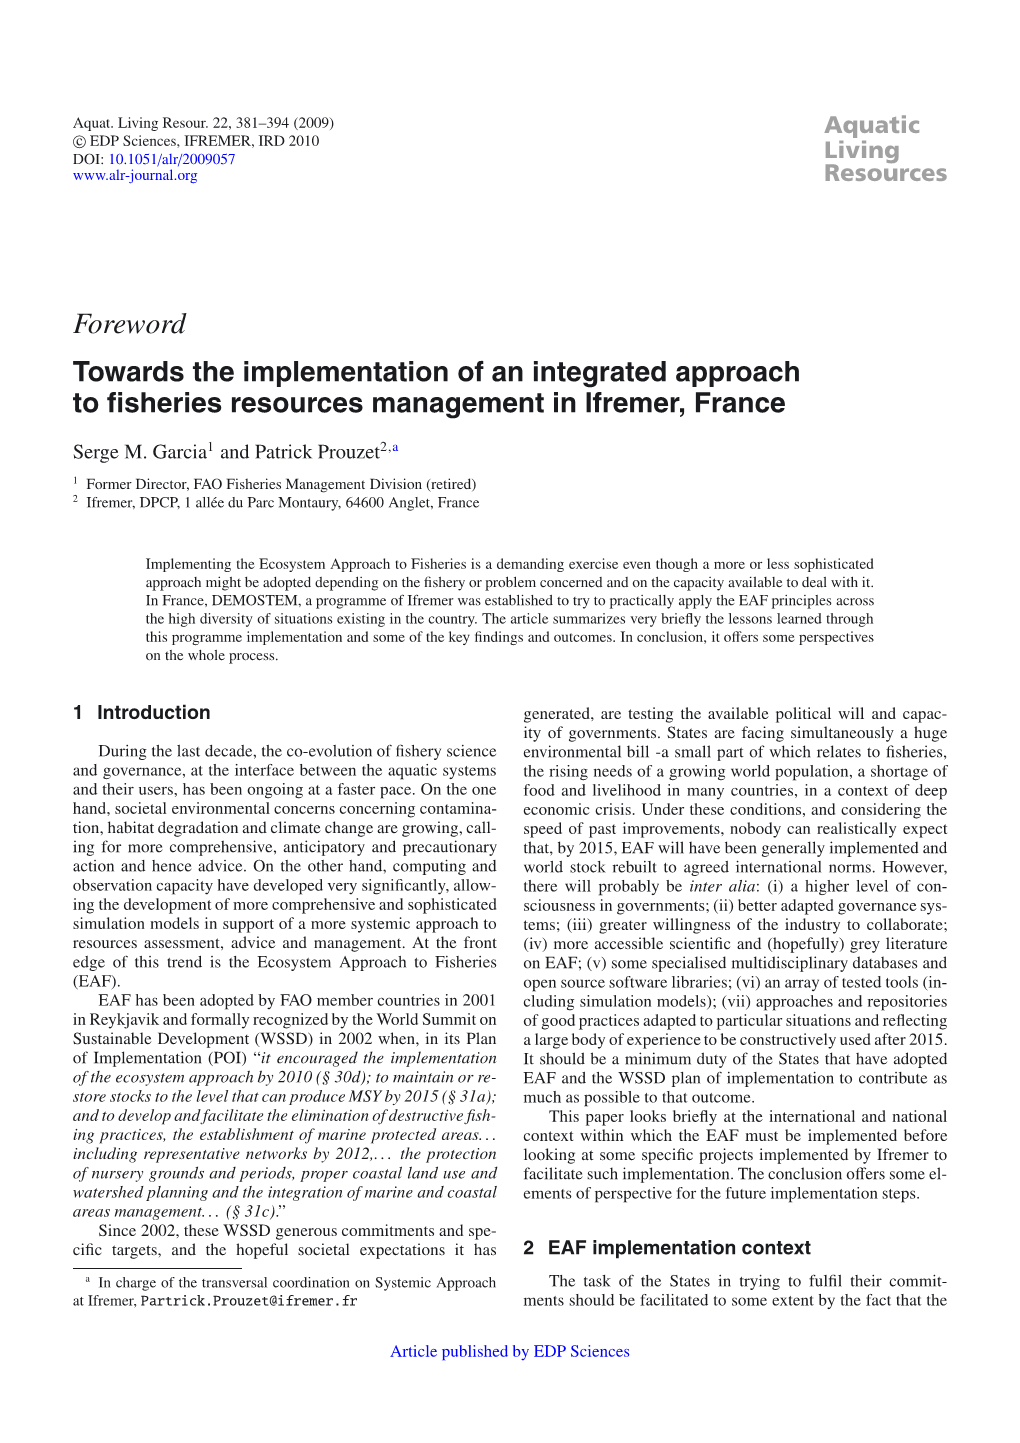 Towards the Implementation of an Integrated Approach to Fisheries Resources Management in Ifremer, France